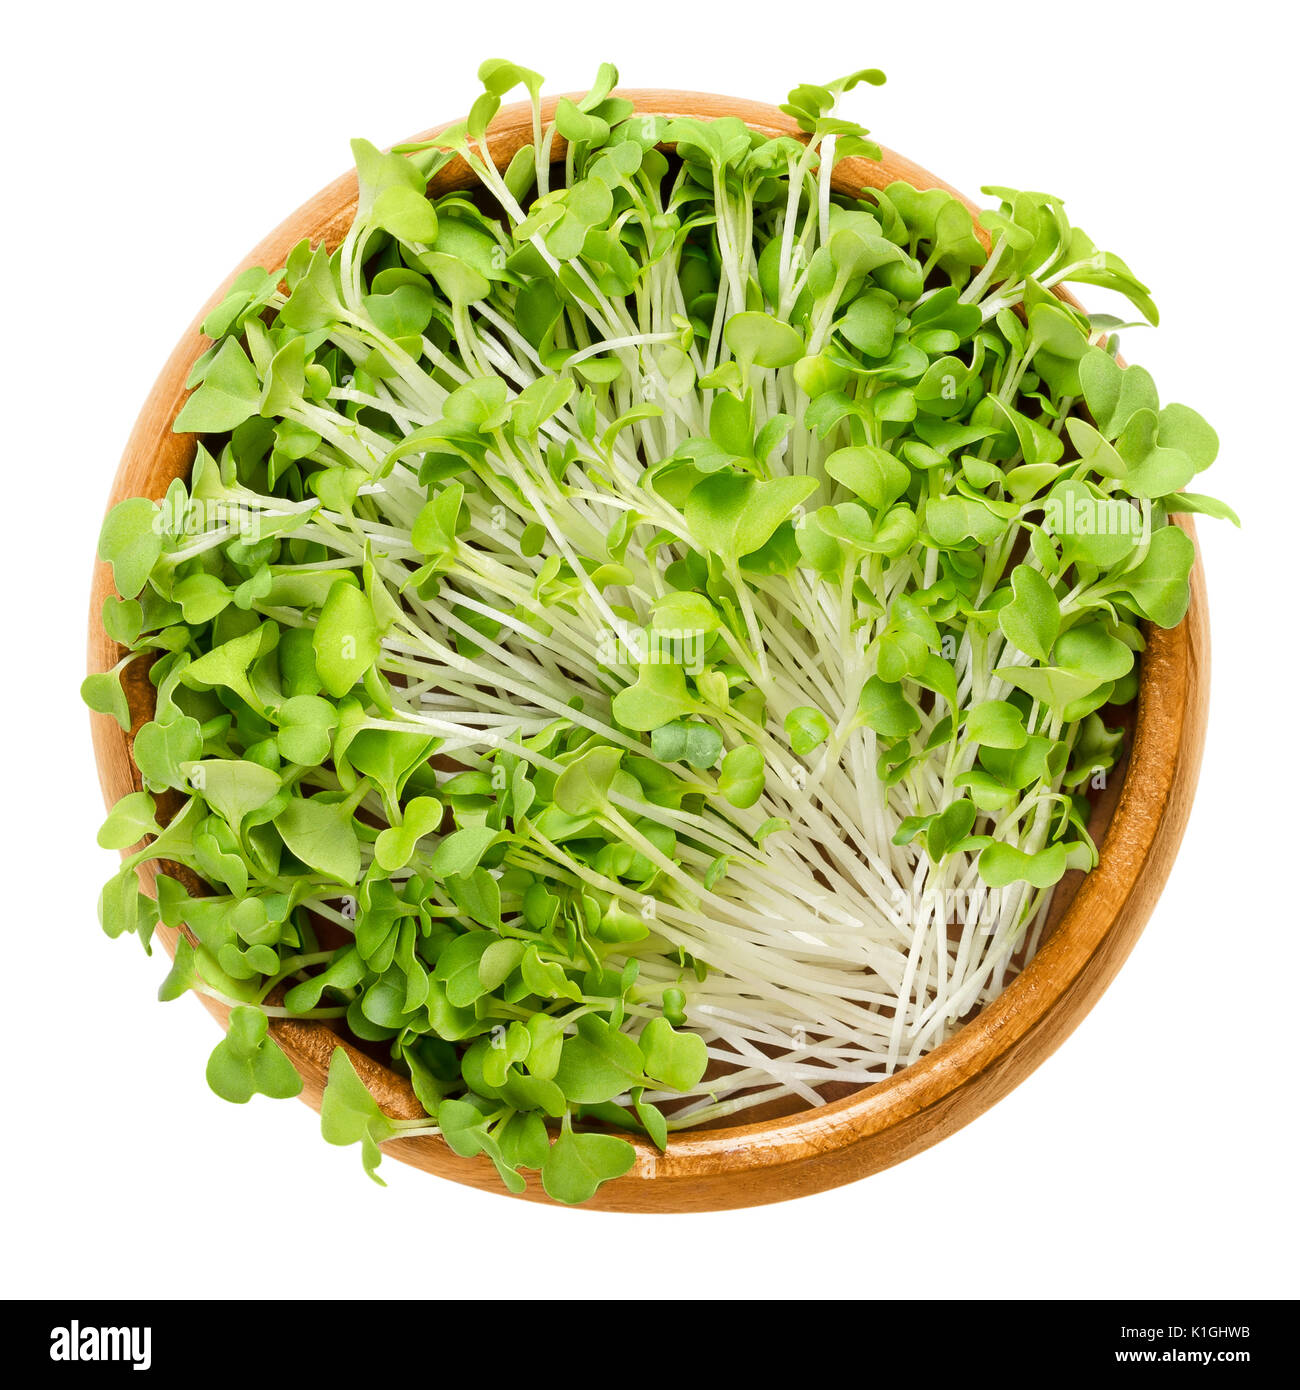 Mizuna sprouts in wooden bowl. Cotyledons of Brassica juncea japonica. Also Japanese mustard greens, kyona or spider mustard. Vegetable. Microgreen. Stock Photo